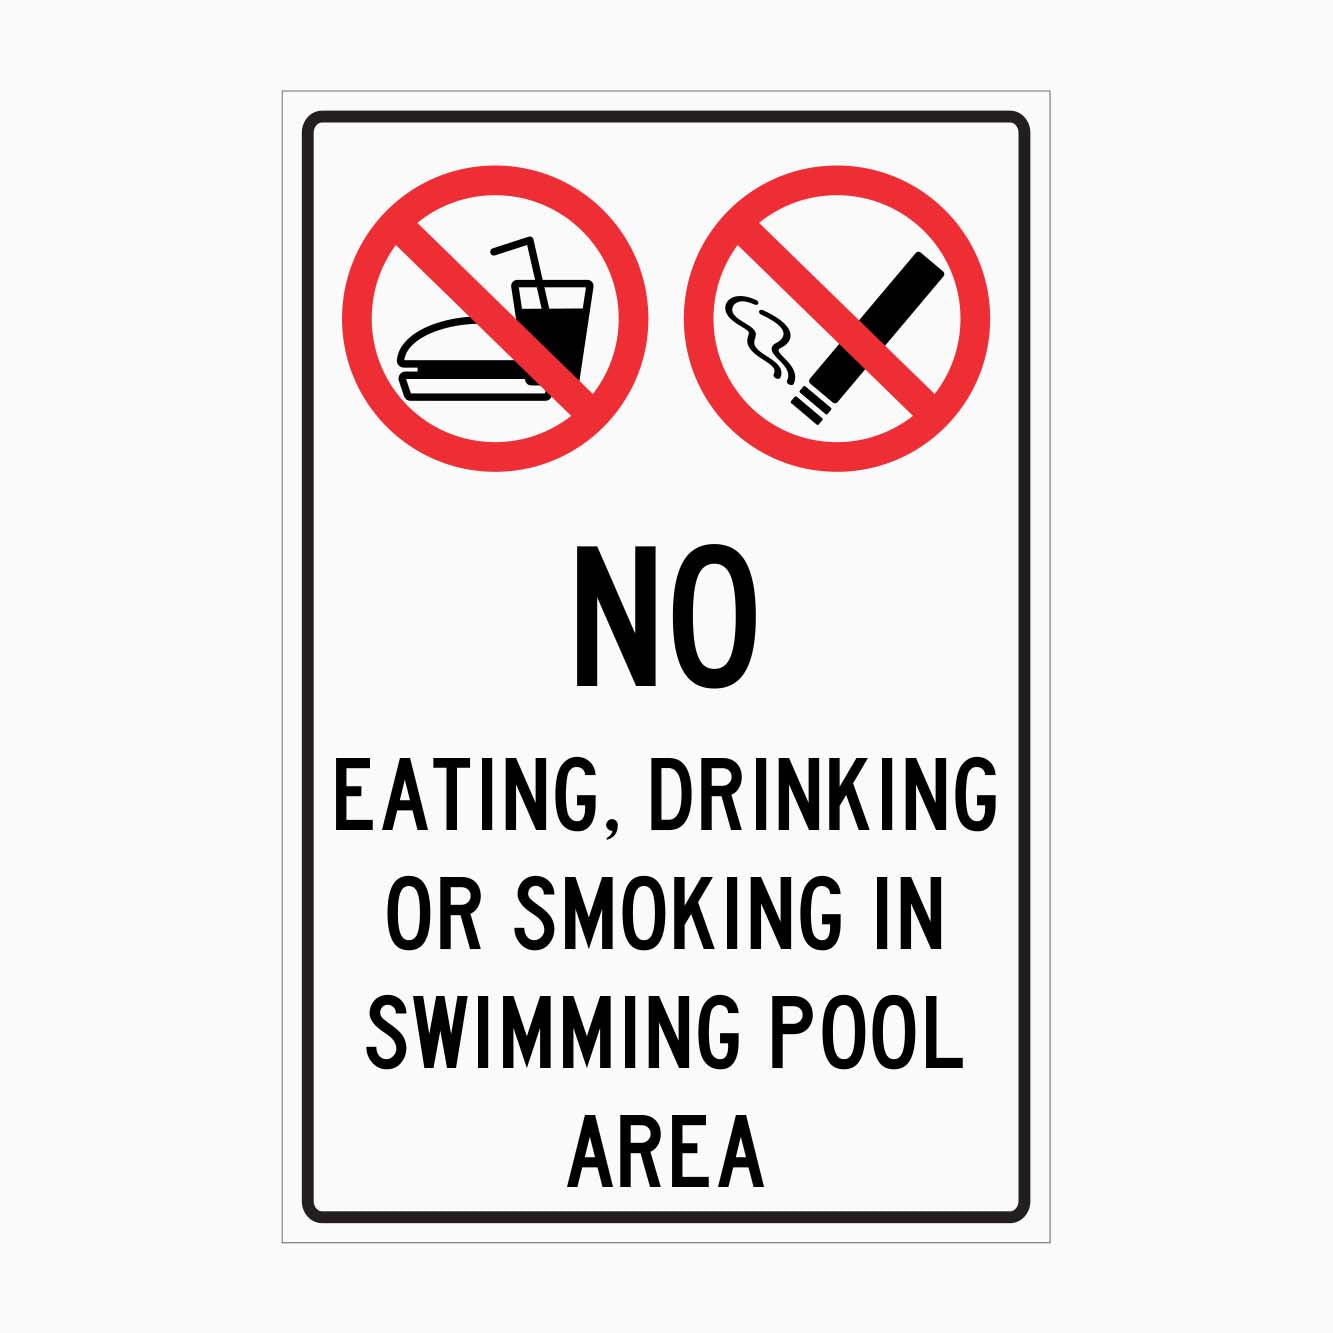 NO EATING, DRINKING OR SMOKING IN SWIMMING POOL AREA SIGN - GET SIGNS